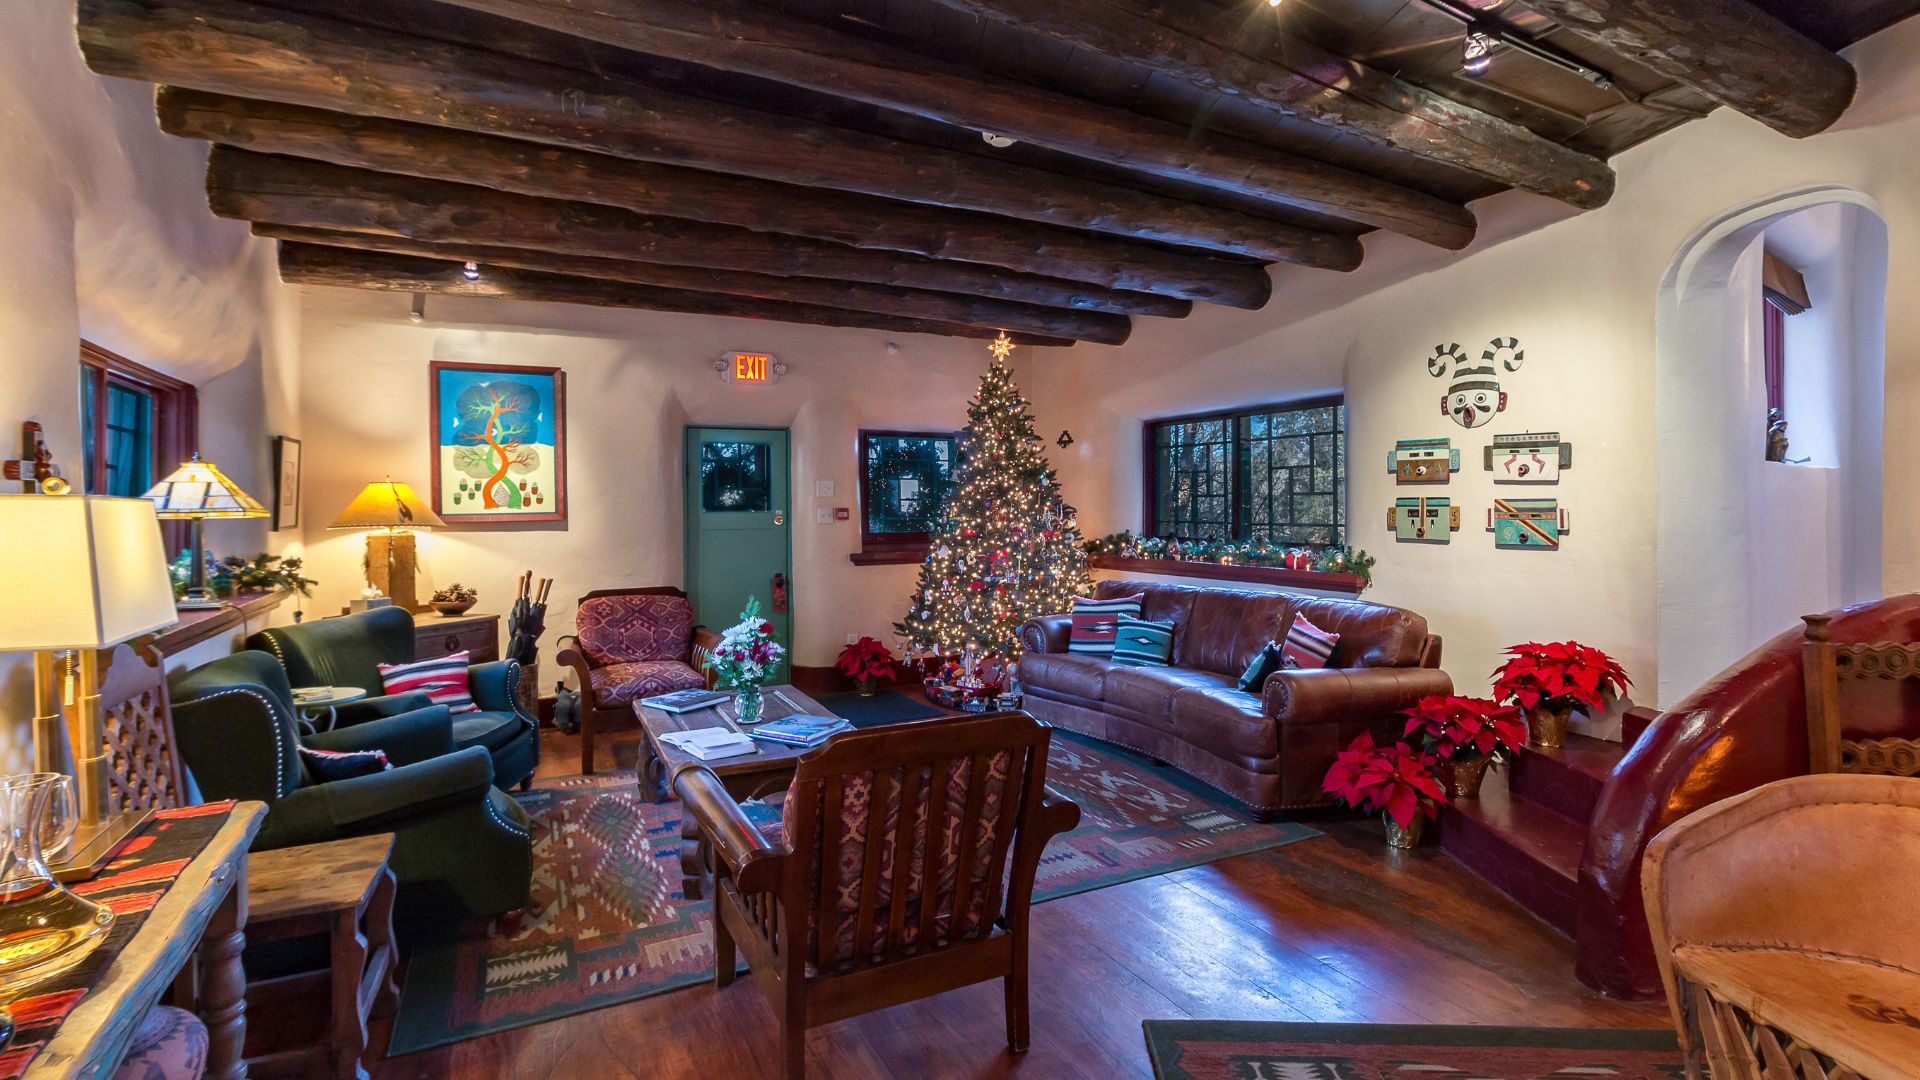 Common living area at The Bear with wood floors and beams all decorated for the holidays with a lit Christmas tree in the corner